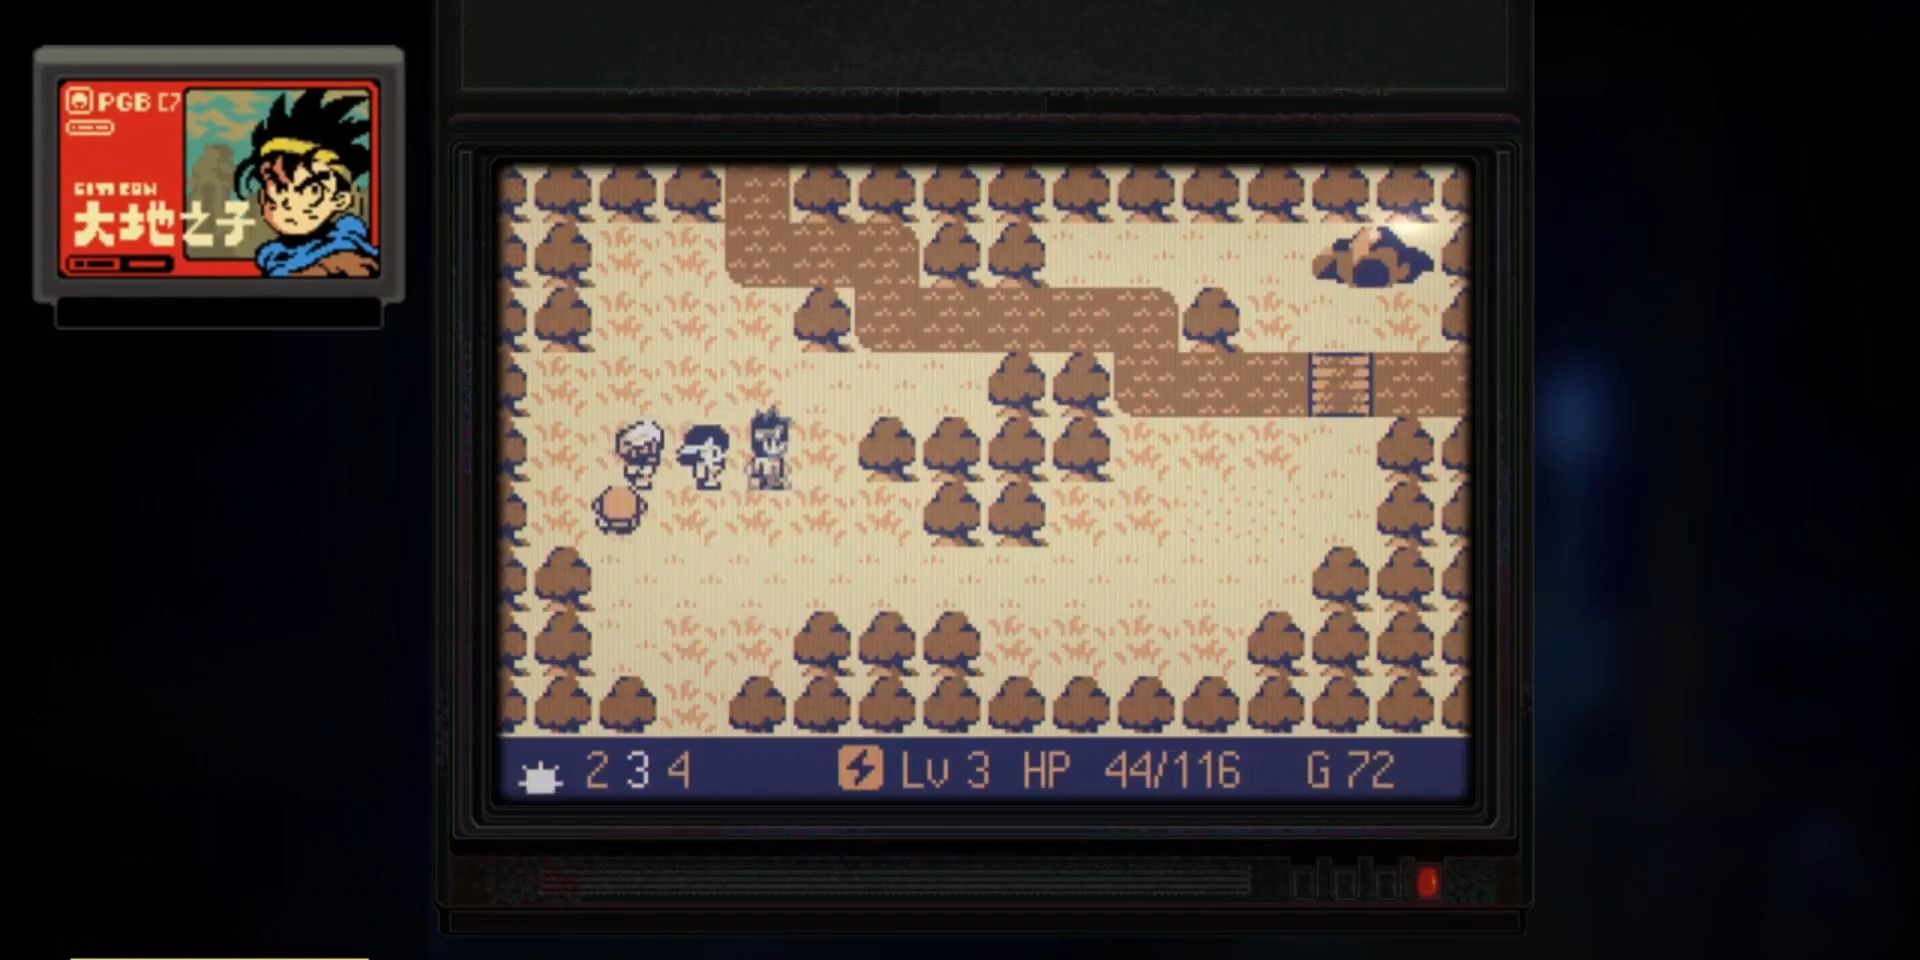 A screenshot showing gameplay from the Earth Born mini-game in Eastward